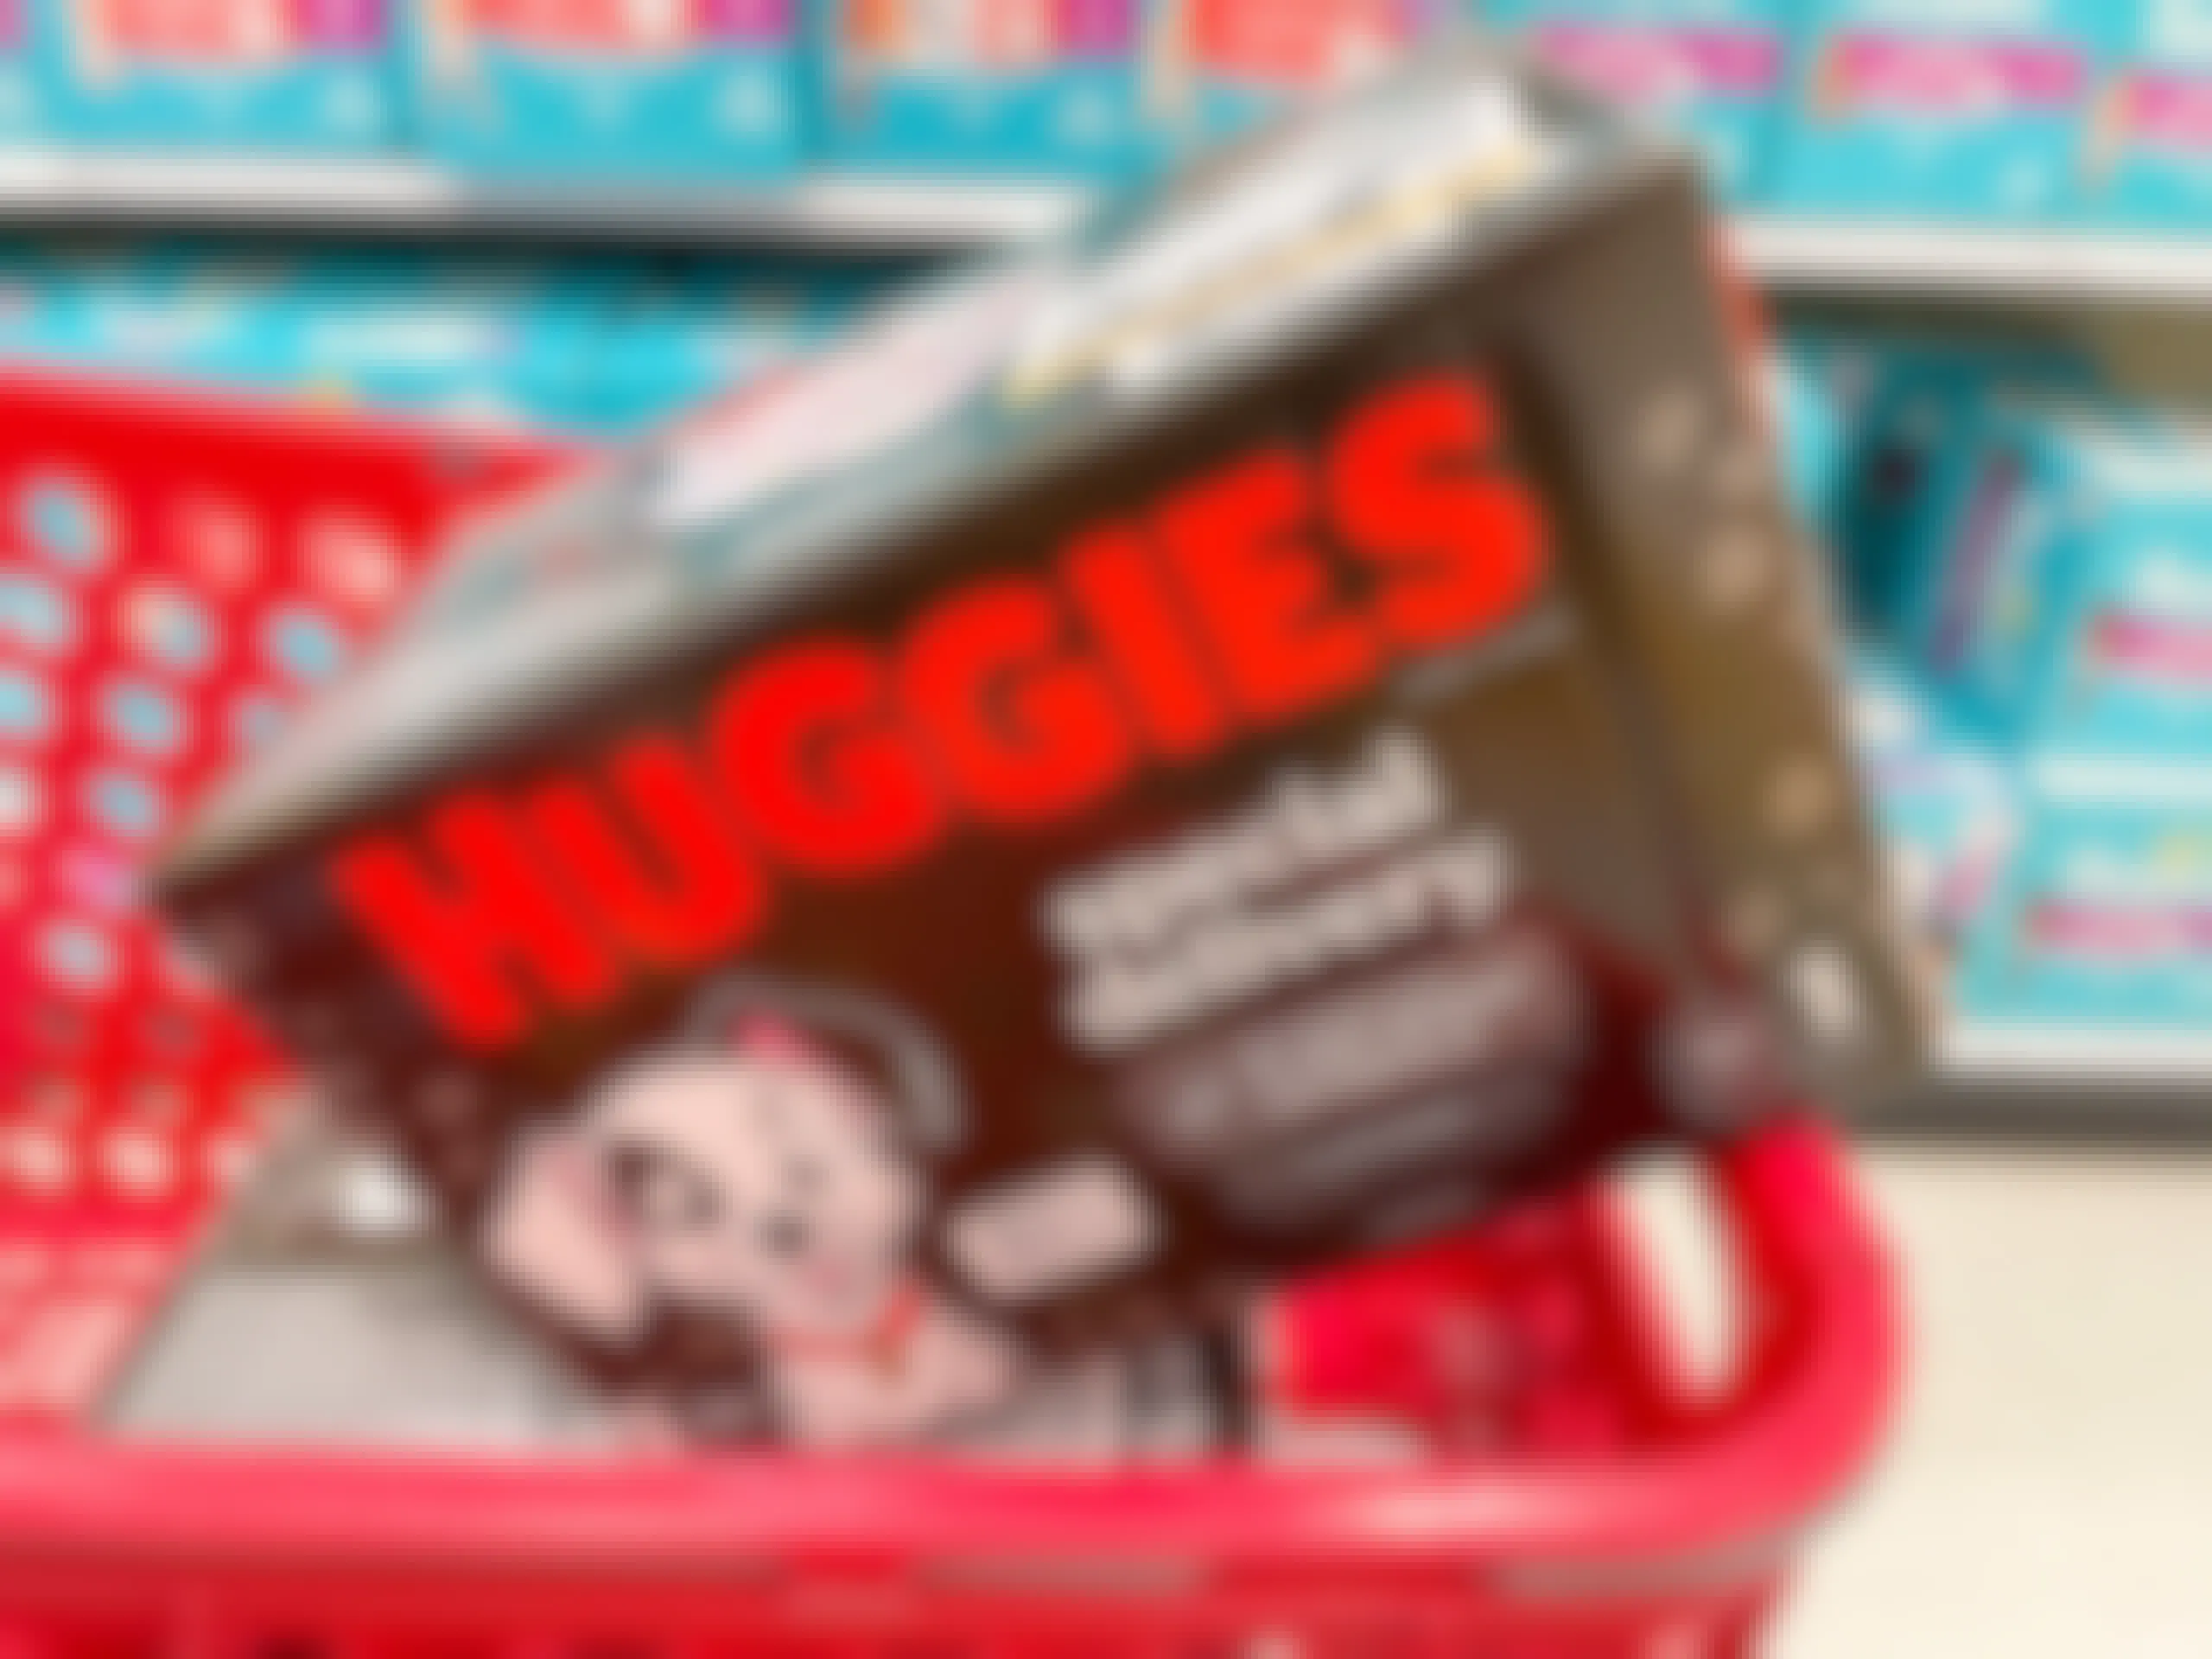 A box of Huggies Special Delivery diapers sitting in a store cart.